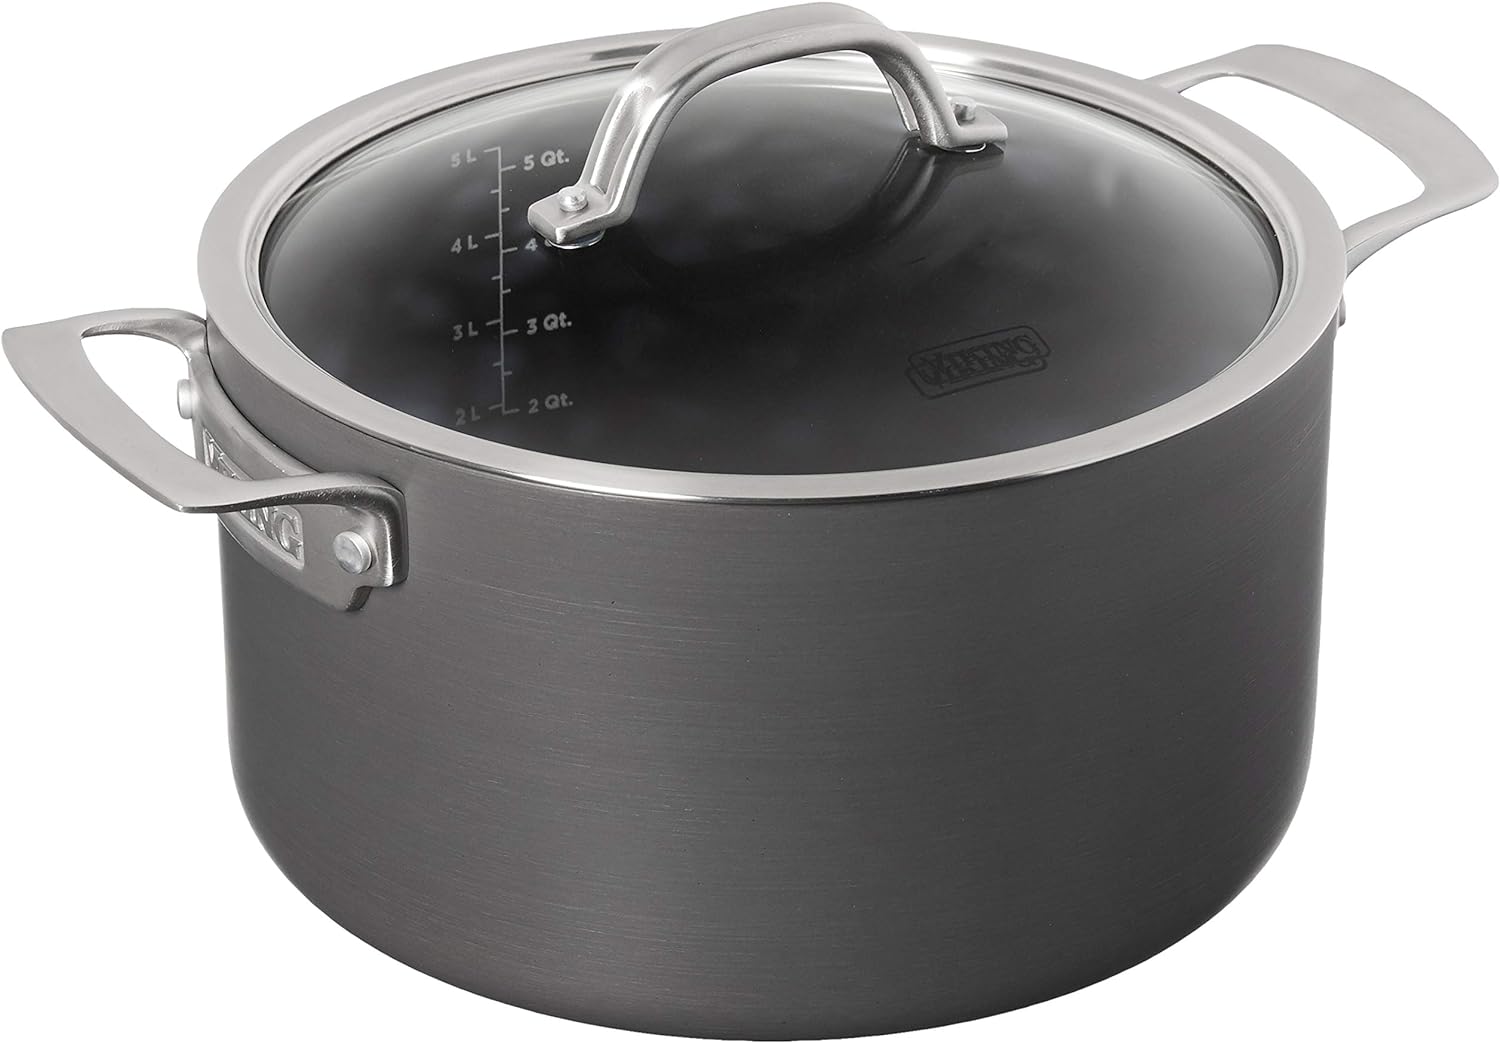 I read so many reviews and articles before making my purchase. I was doing so much research I gave myself anxiety. I am very happy with my final decision. This is a sturdy pot, stays put on my glass top stove. Great heat distribution, cleans nicely, and the lid is a perfect fit. I am making lots of chili this winter.